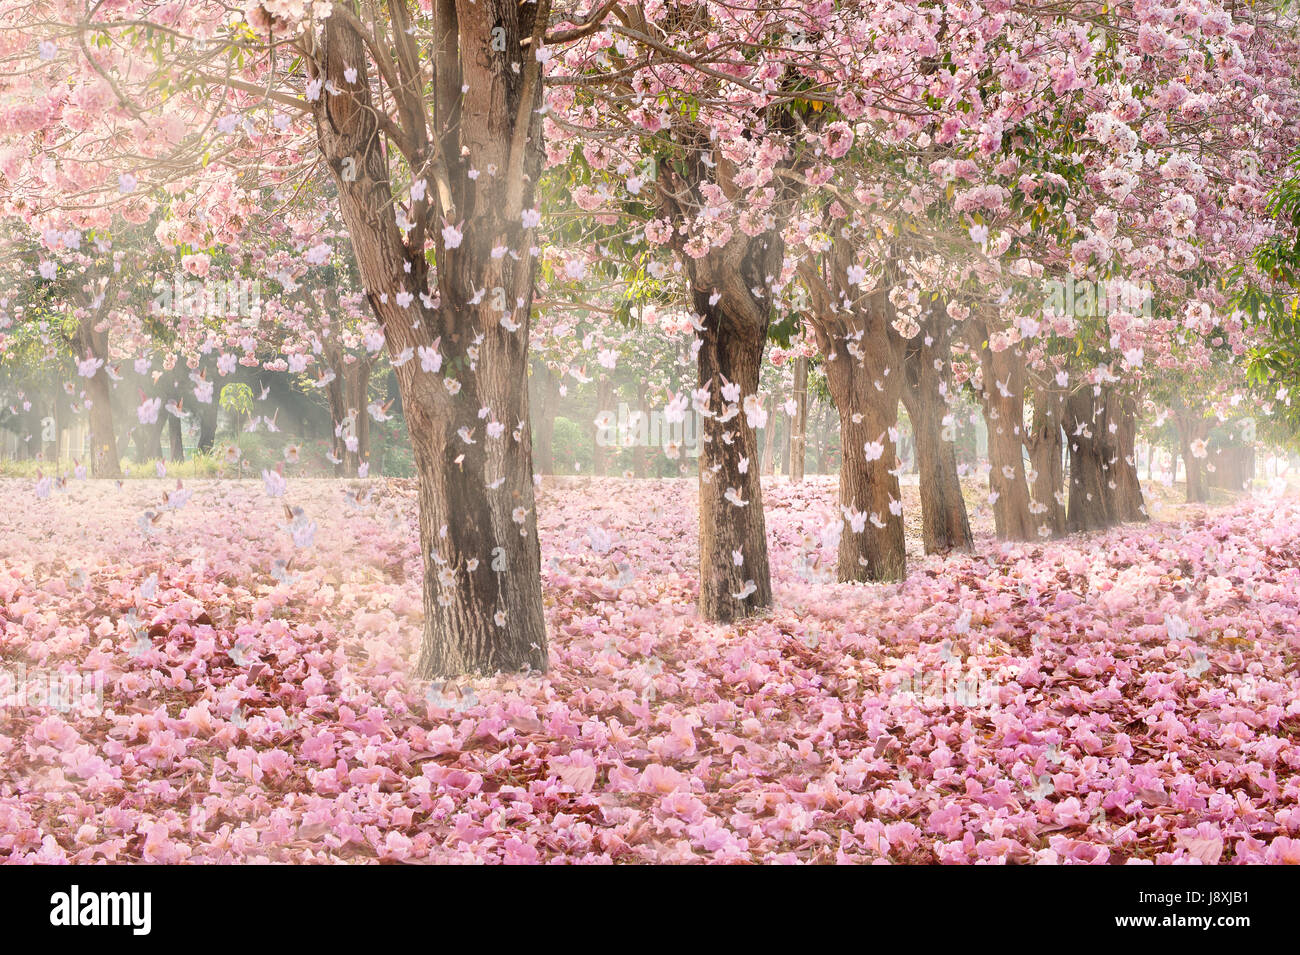 Falling petal over the romantic tunnel of pink flower trees / Romantic  Blossom tree over nature background in Spring season / flowers Background  Stock Photo - Alamy